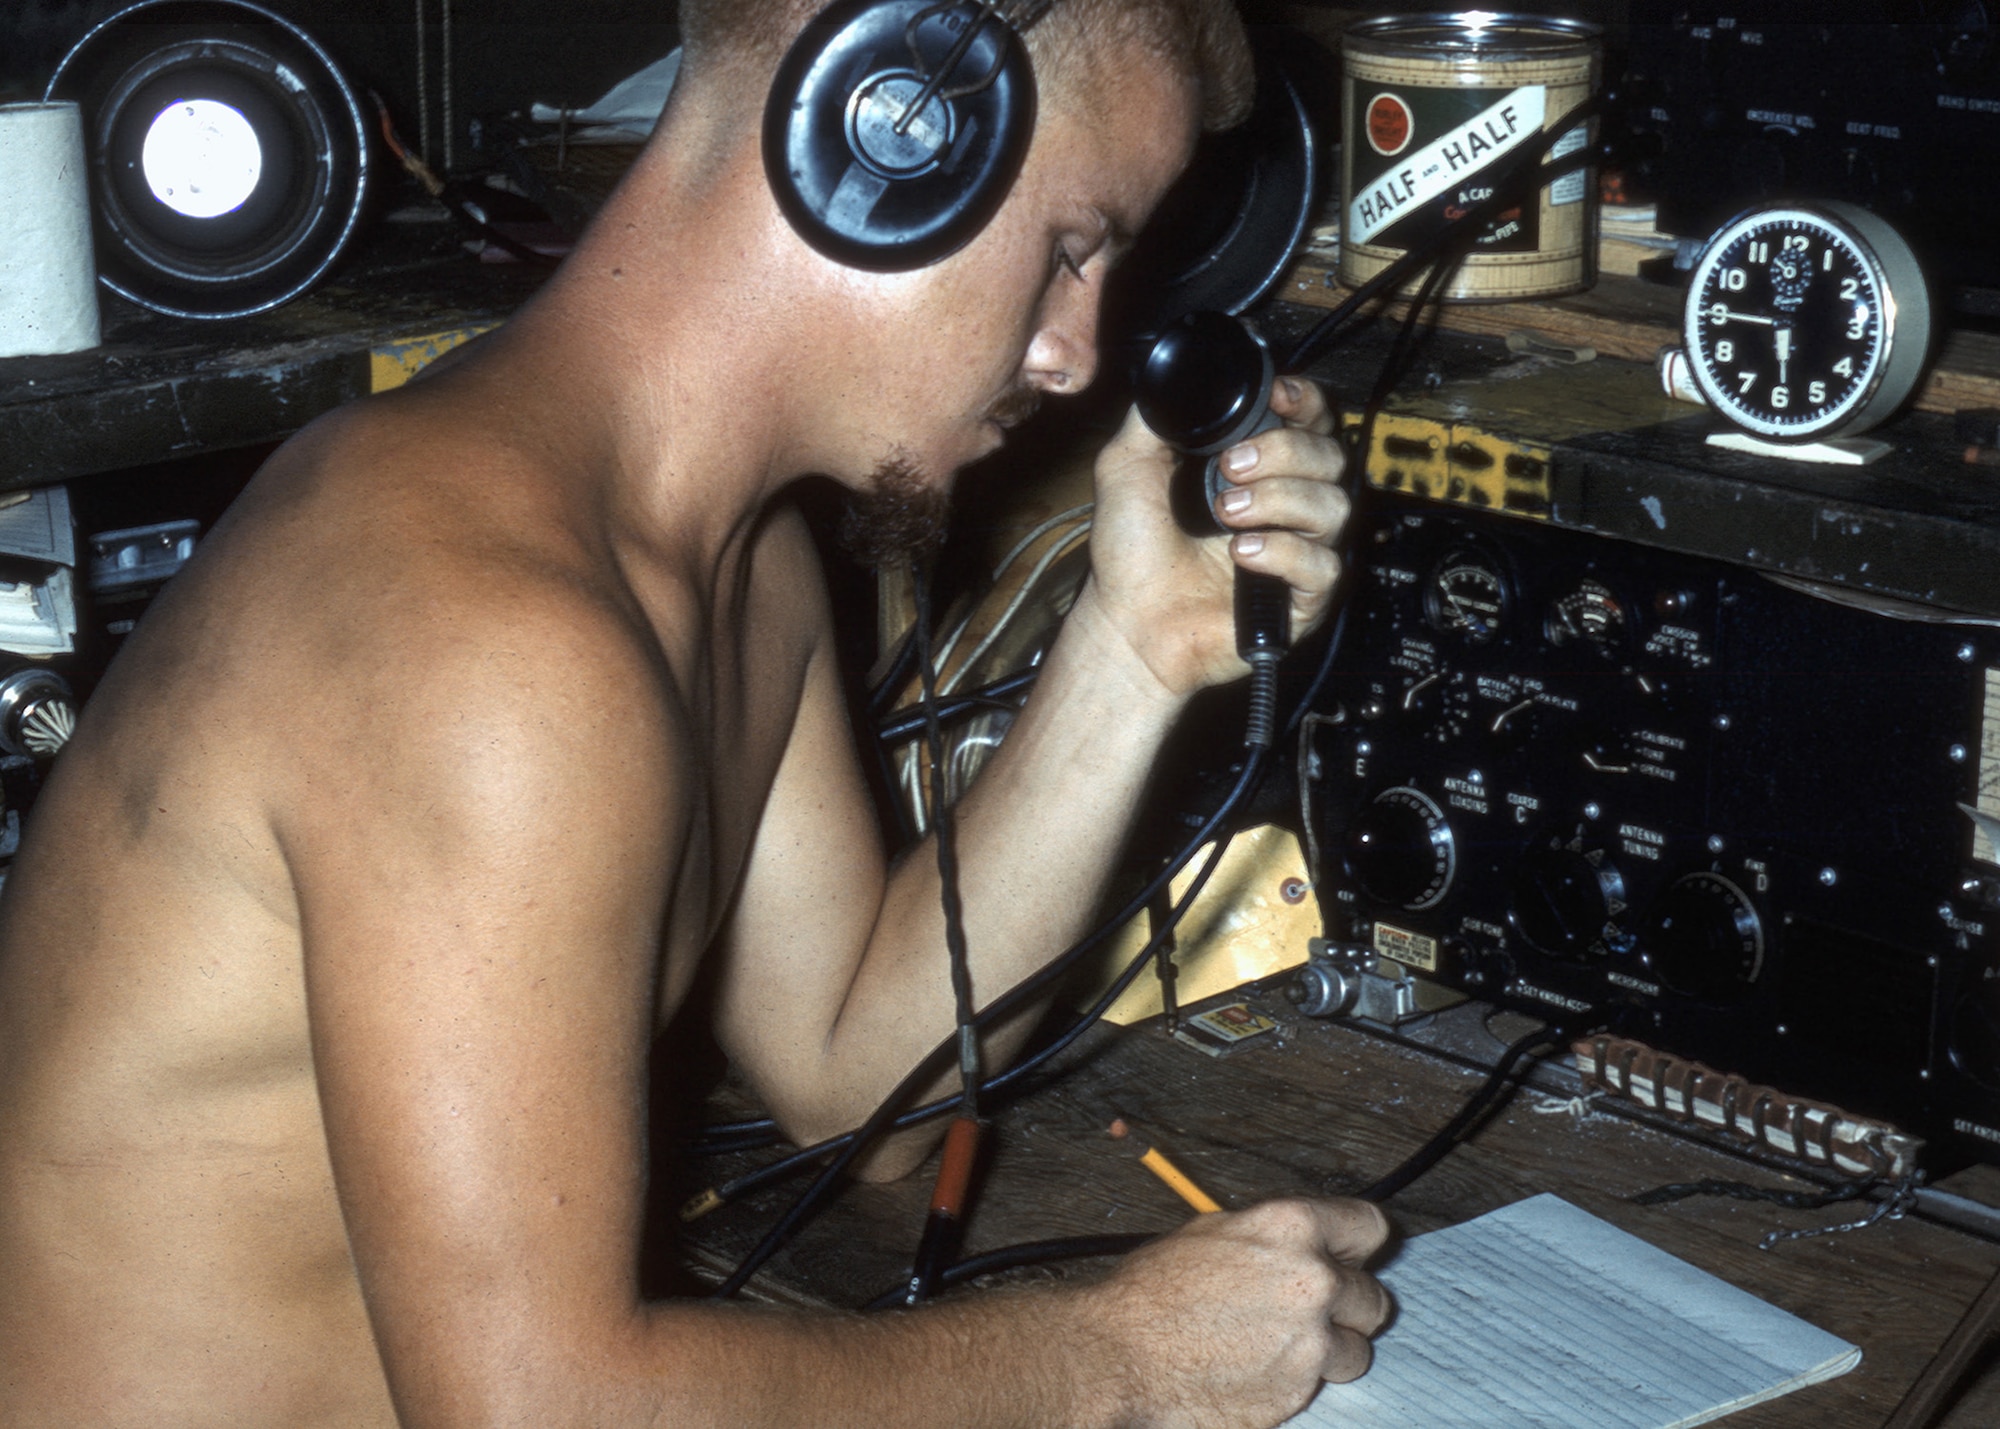 Airman 2nd Class Bob Cunningham, 1374th Mapping and Charting Squadron, operates radar equipment on North Danger Island in 1956. The tiny island in the South China Sea, located midway between the Philippine Islands and Vietnam, became an important station during an Air Force project to accurately map the world using aerial electronic geodetic survey. The processed data would eventually benefit intercontinental ballistic missile targeting. (Courtesy photo/Bob Cunningham)